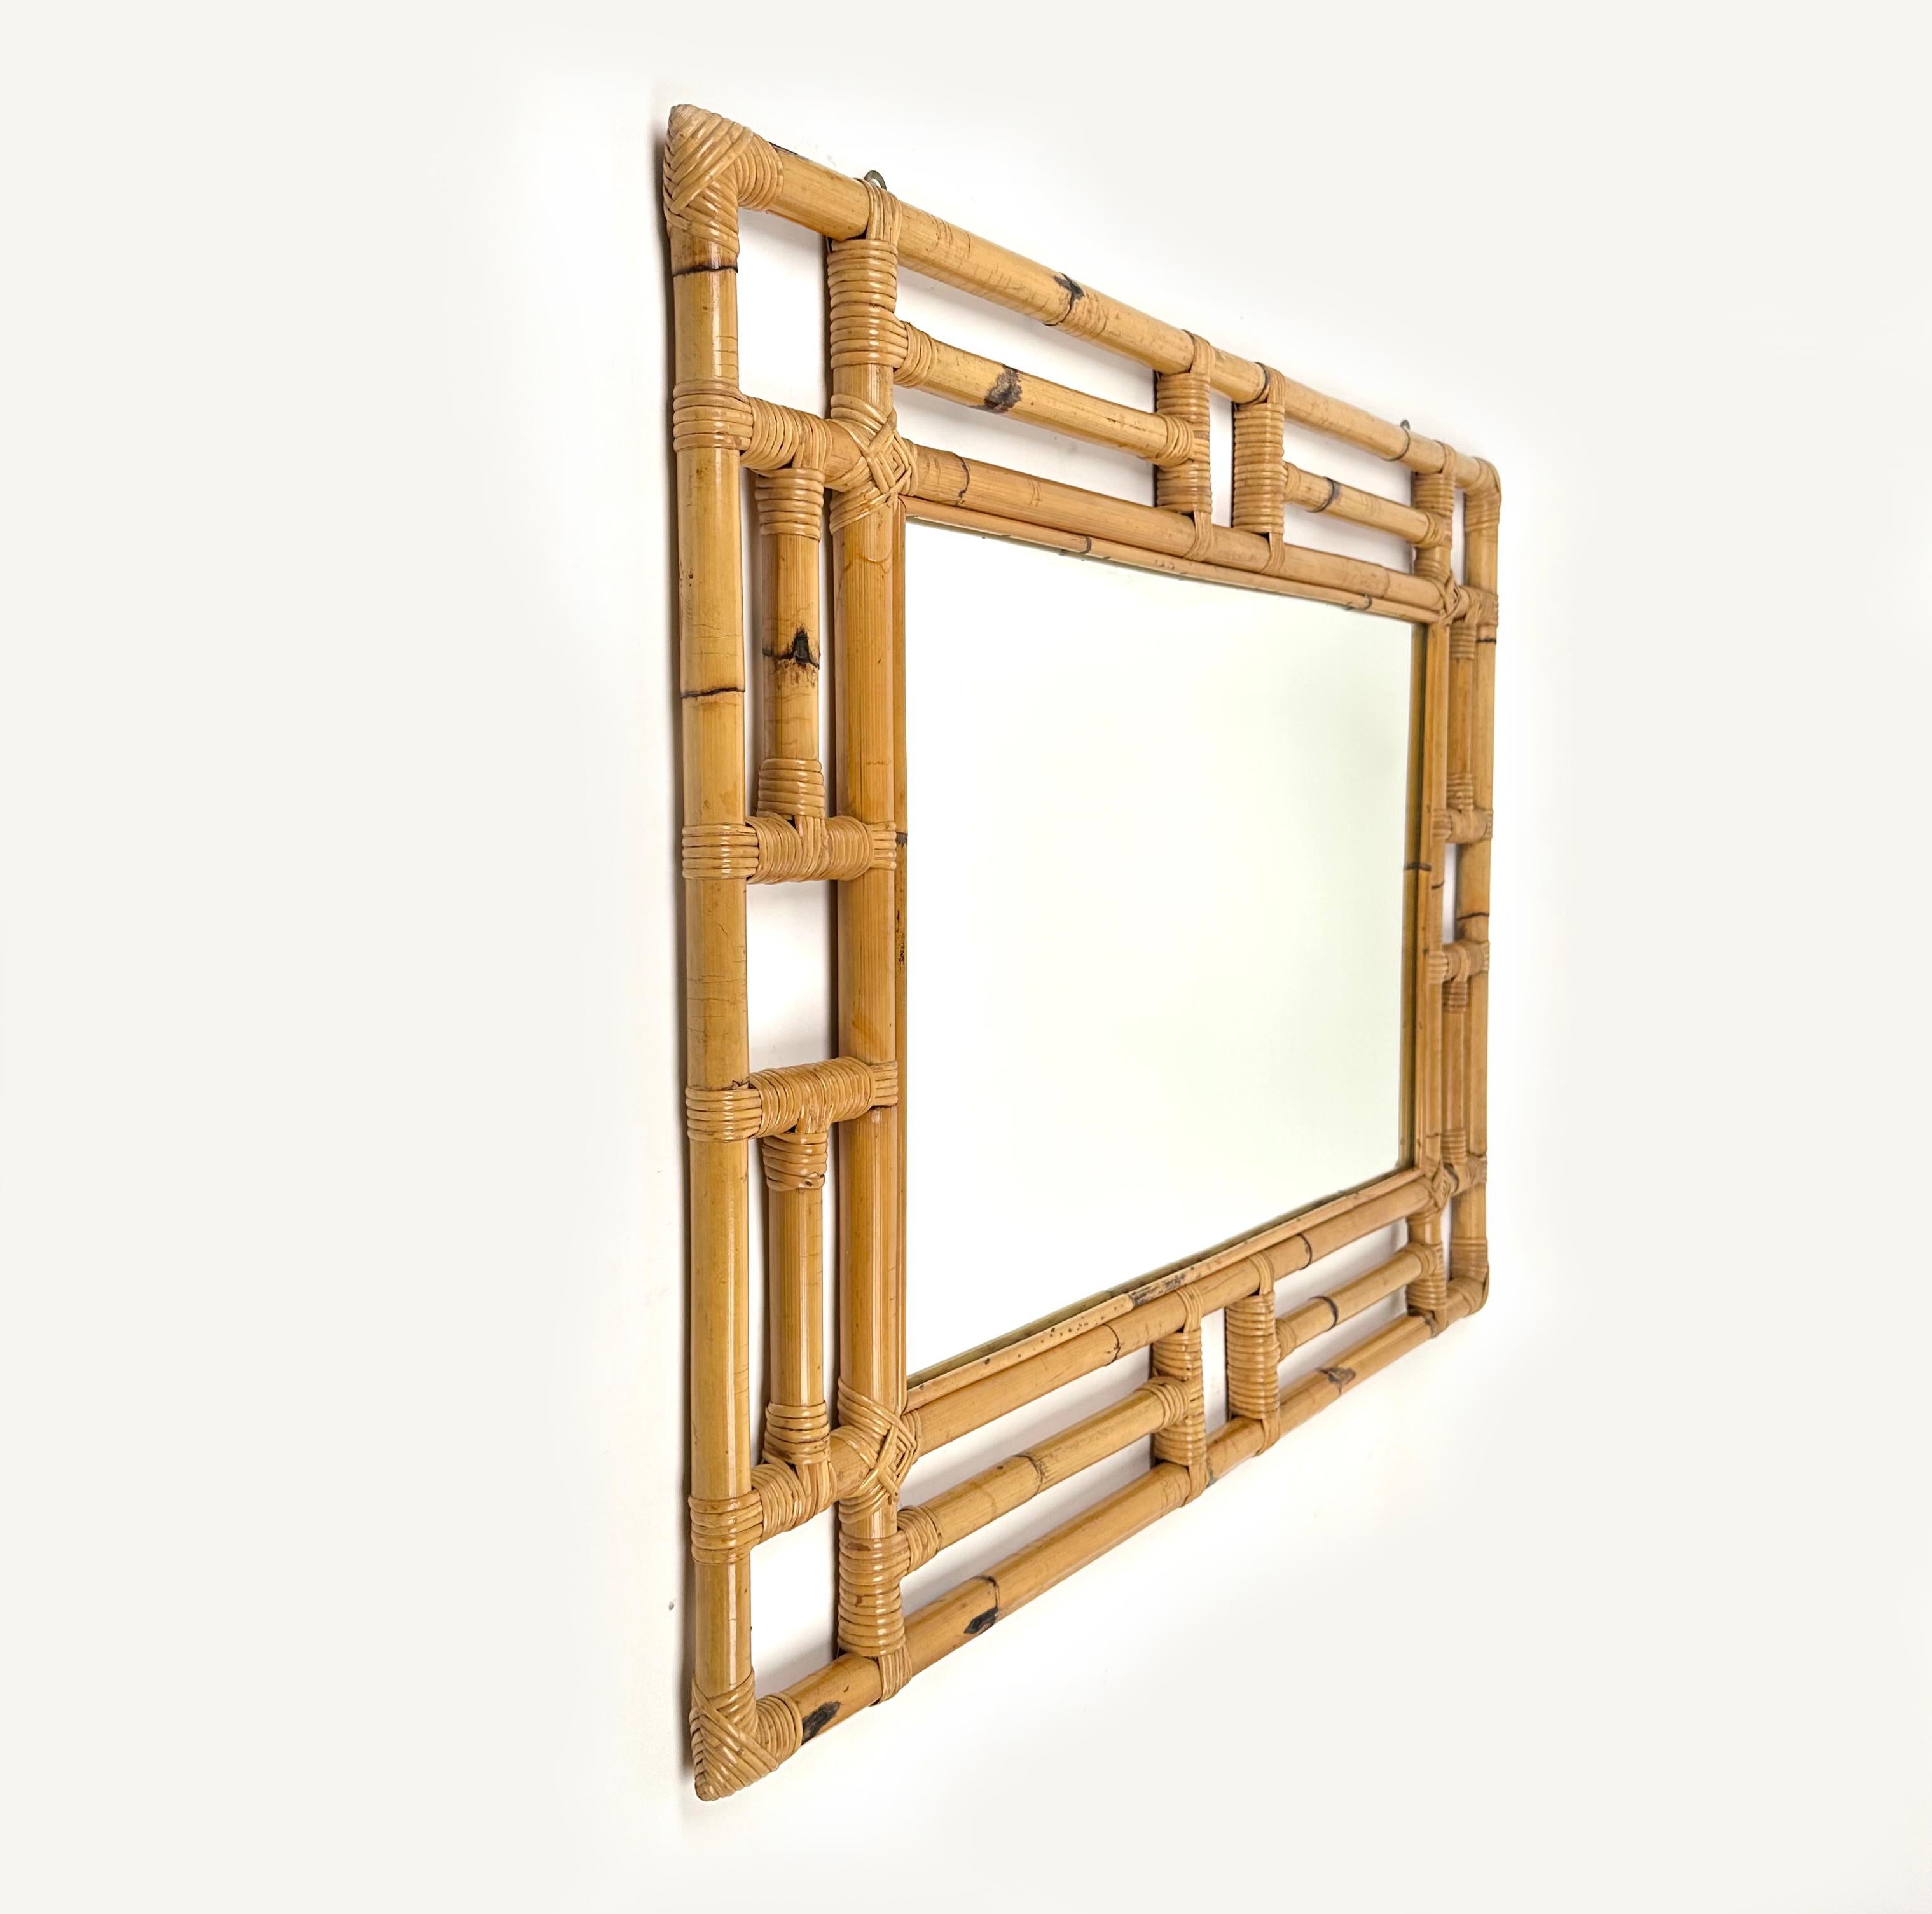 Mid-Century Modern Rectangular Wall Mirror in Bamboo and Rattan Vivai del Sud Style, Italy 1970s For Sale